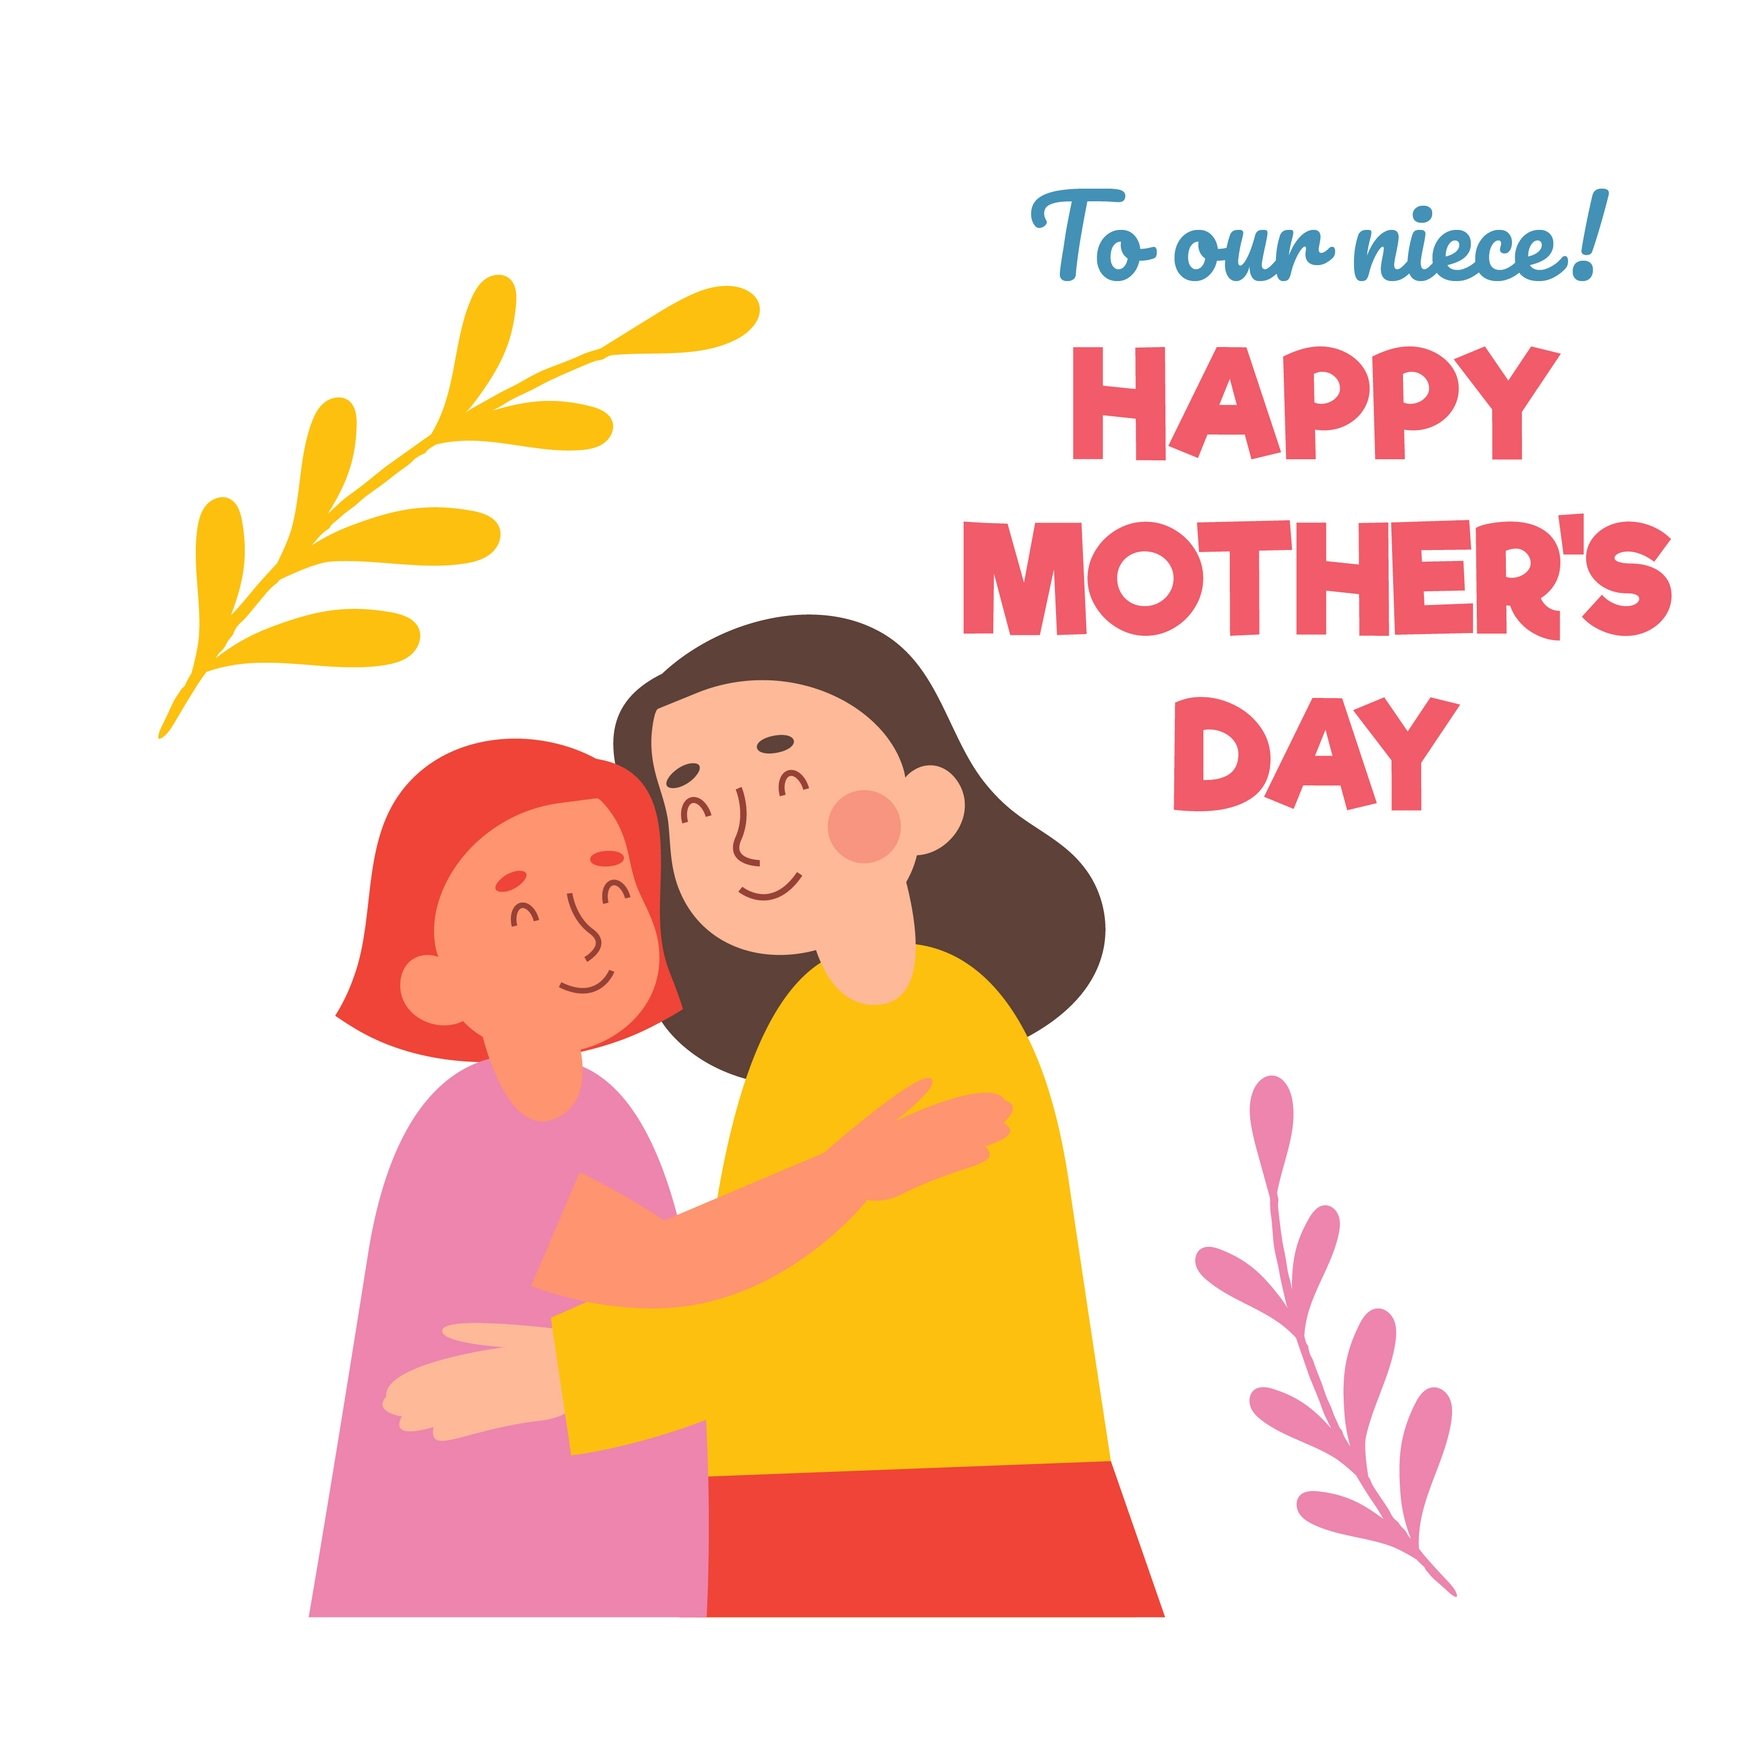 alex muratalla recommends happy mothers day to my niece gif pic